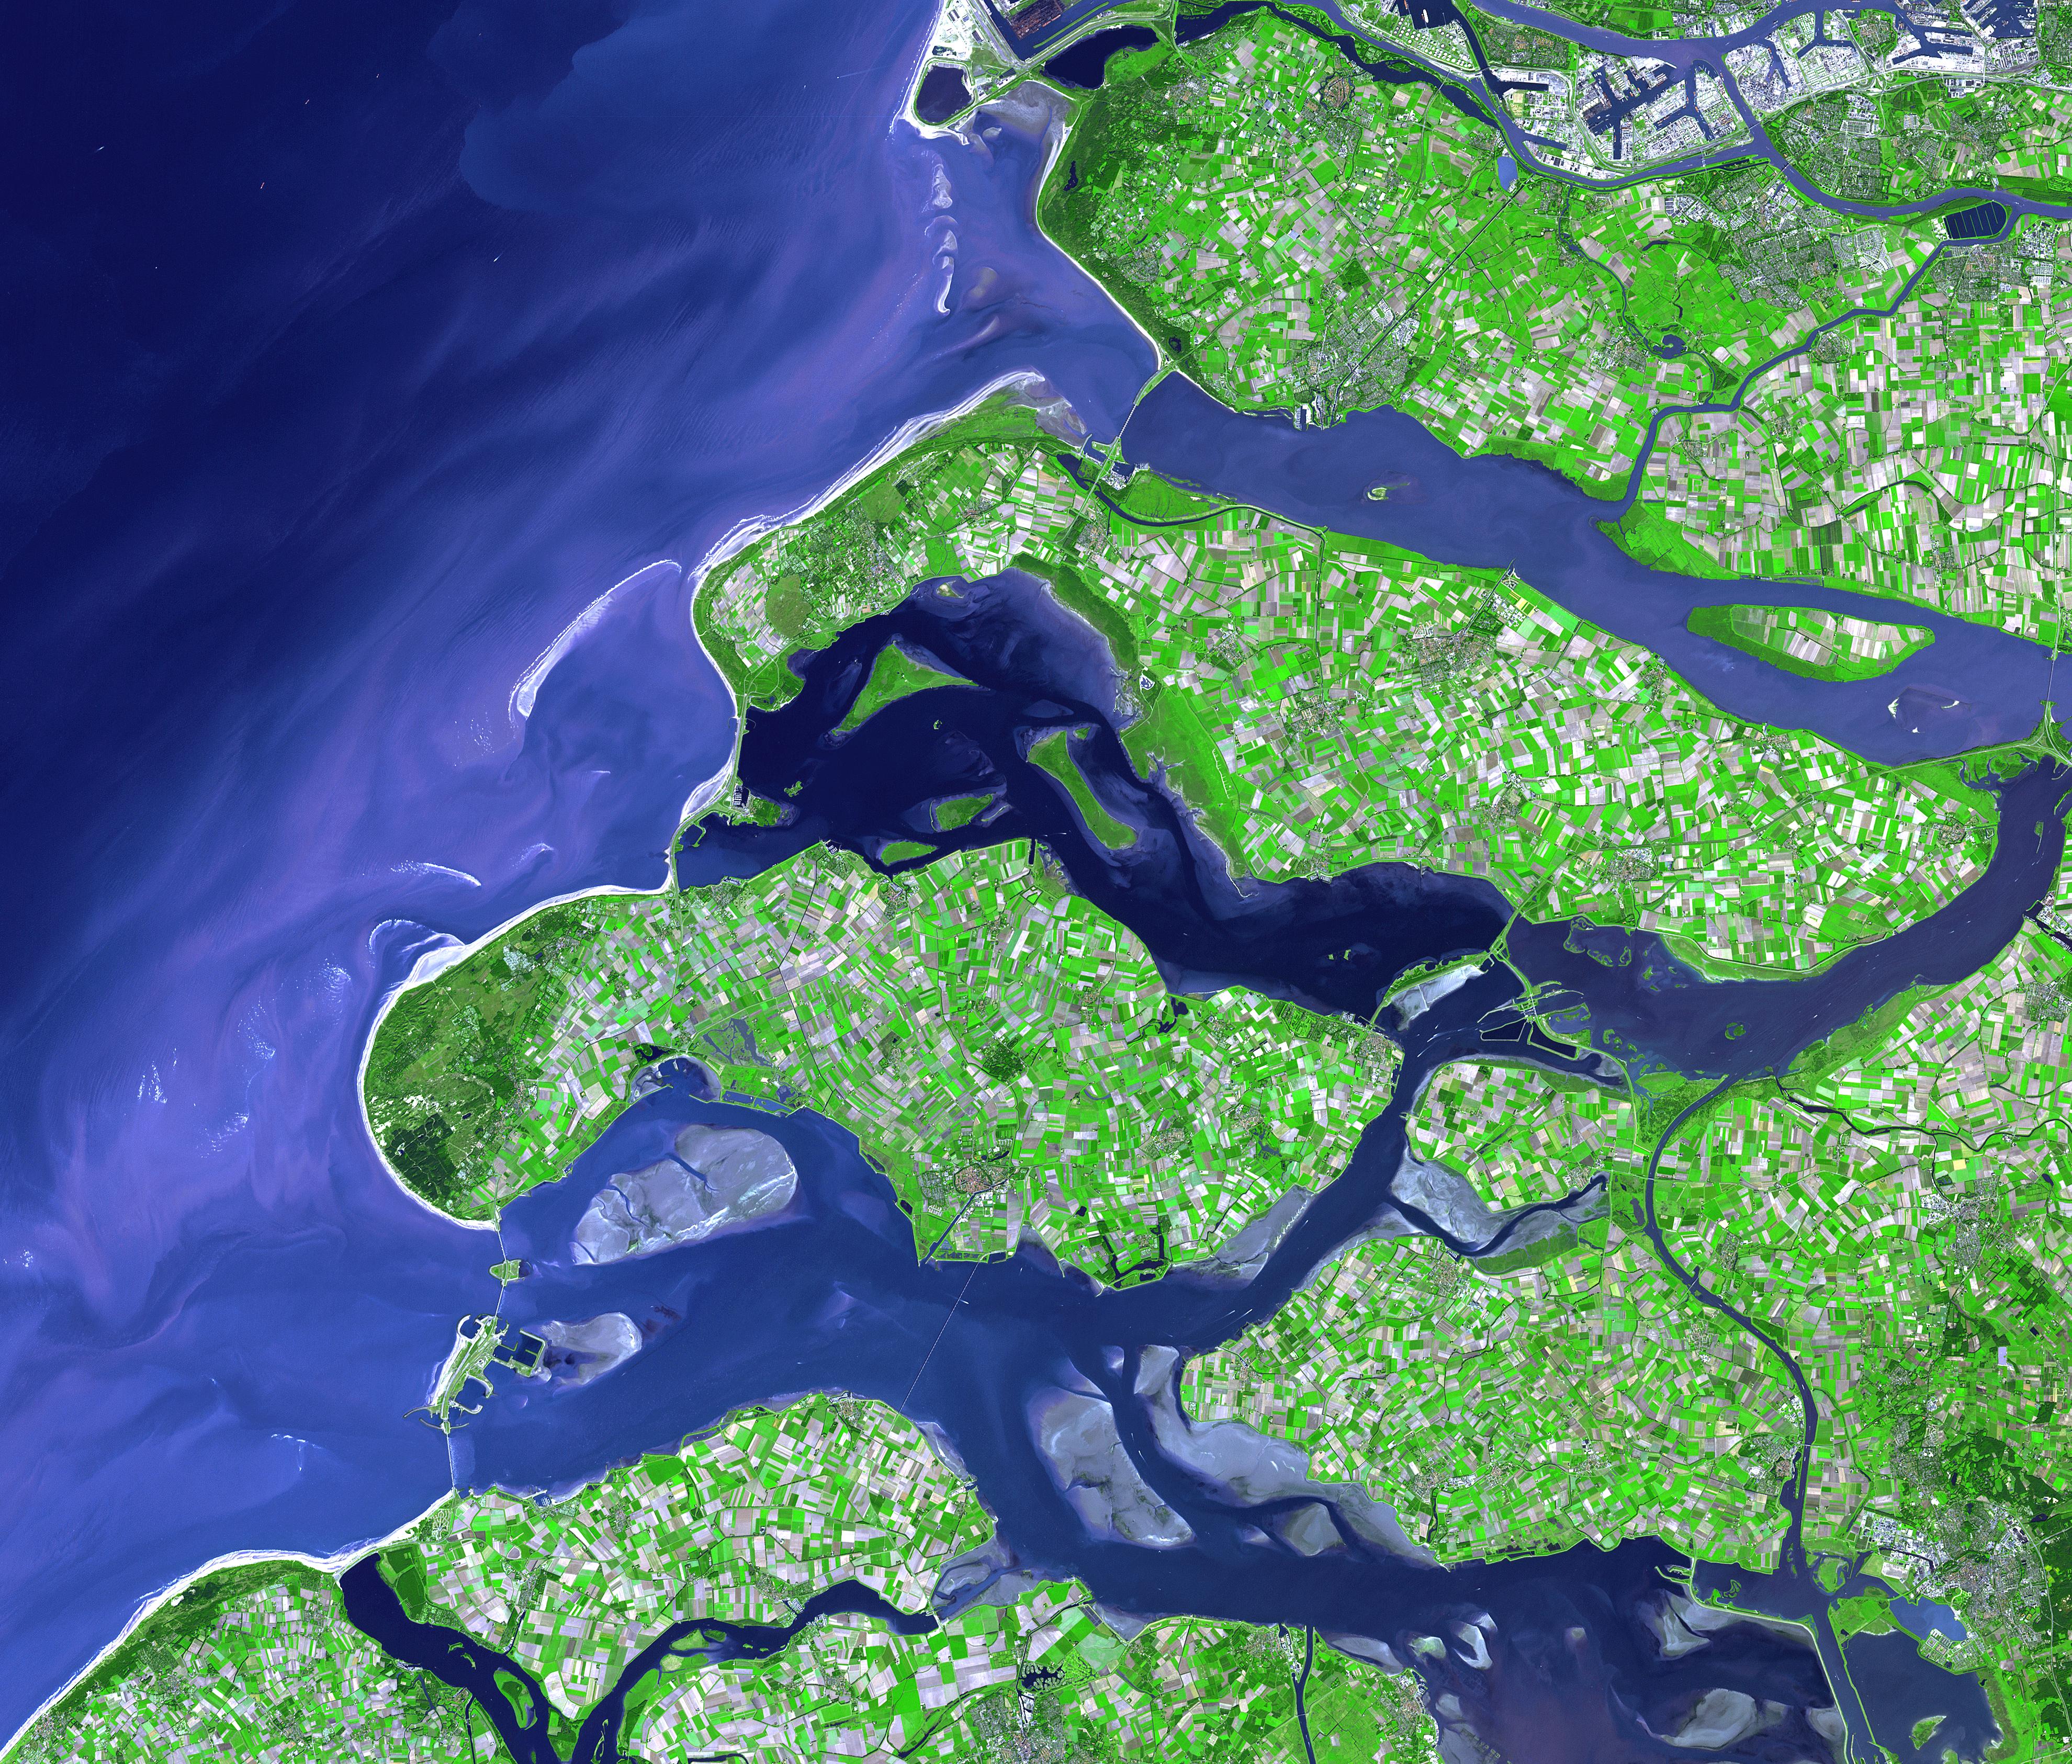 Netherlands Dikes Image Of The Day